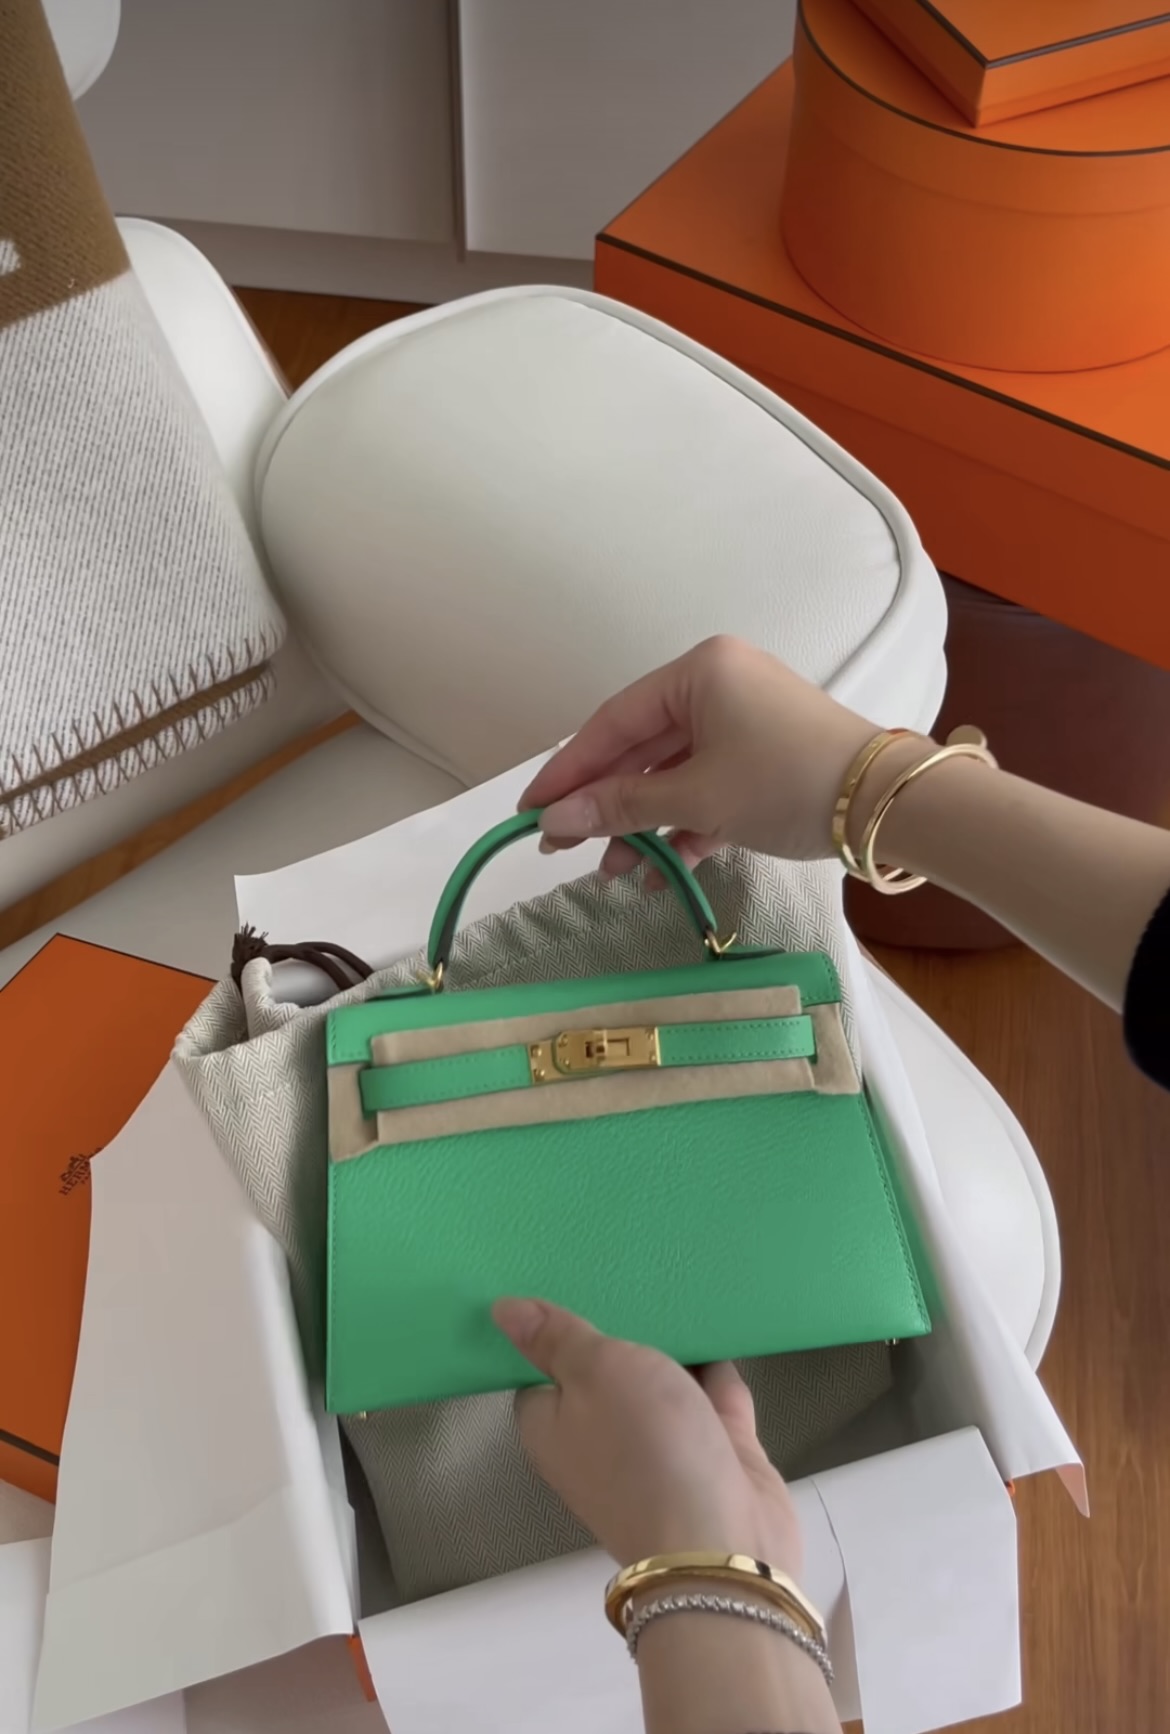 A Guide To Choosing Your First Luxury Bag - PurseBop